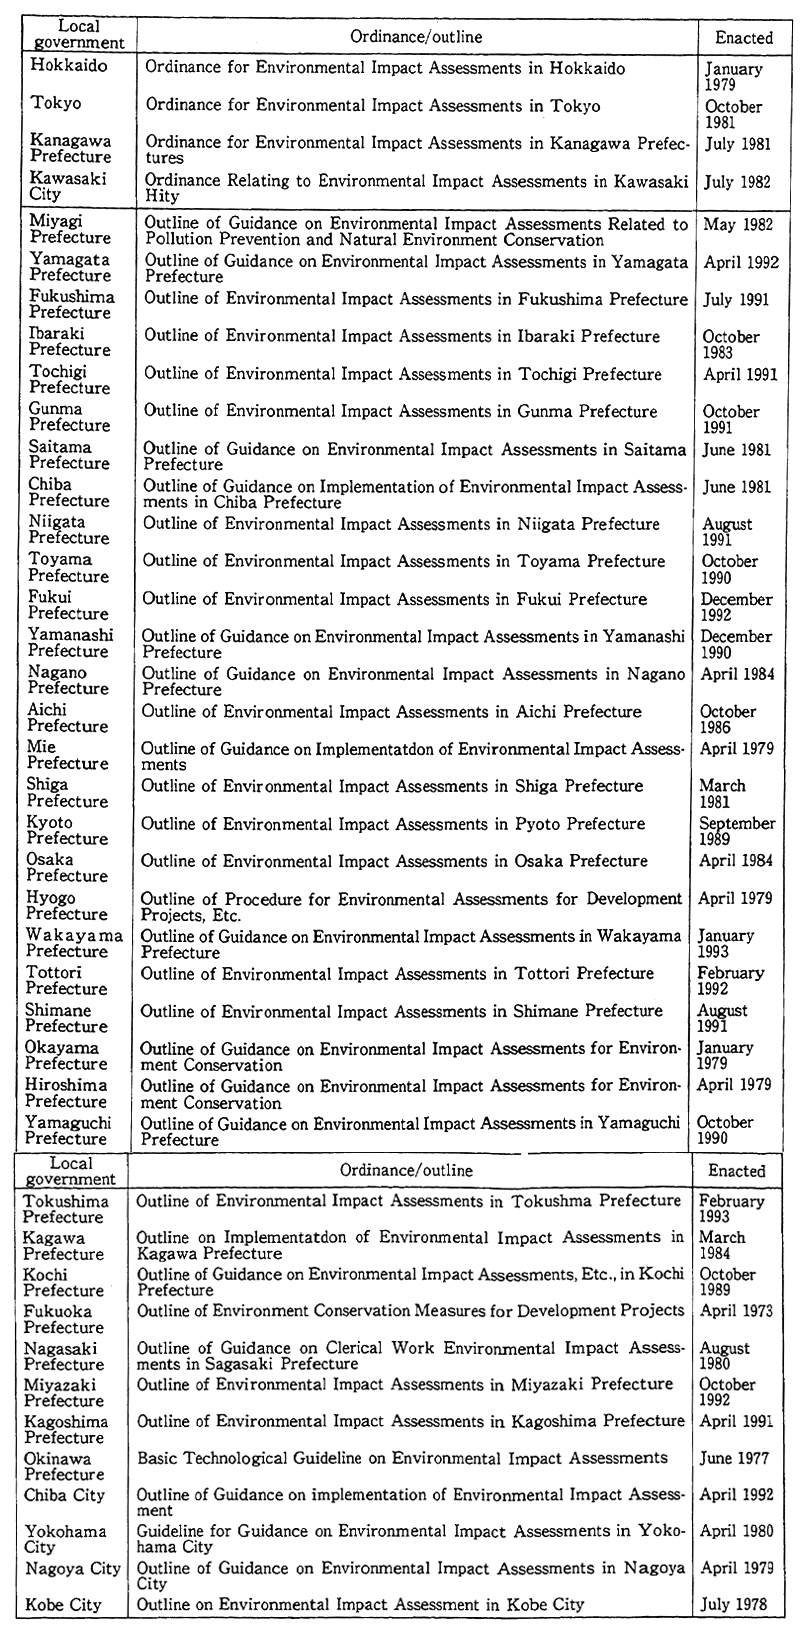 Table 5-3-2 Enactment of Ordinances and Outlines on Environmental Assessments